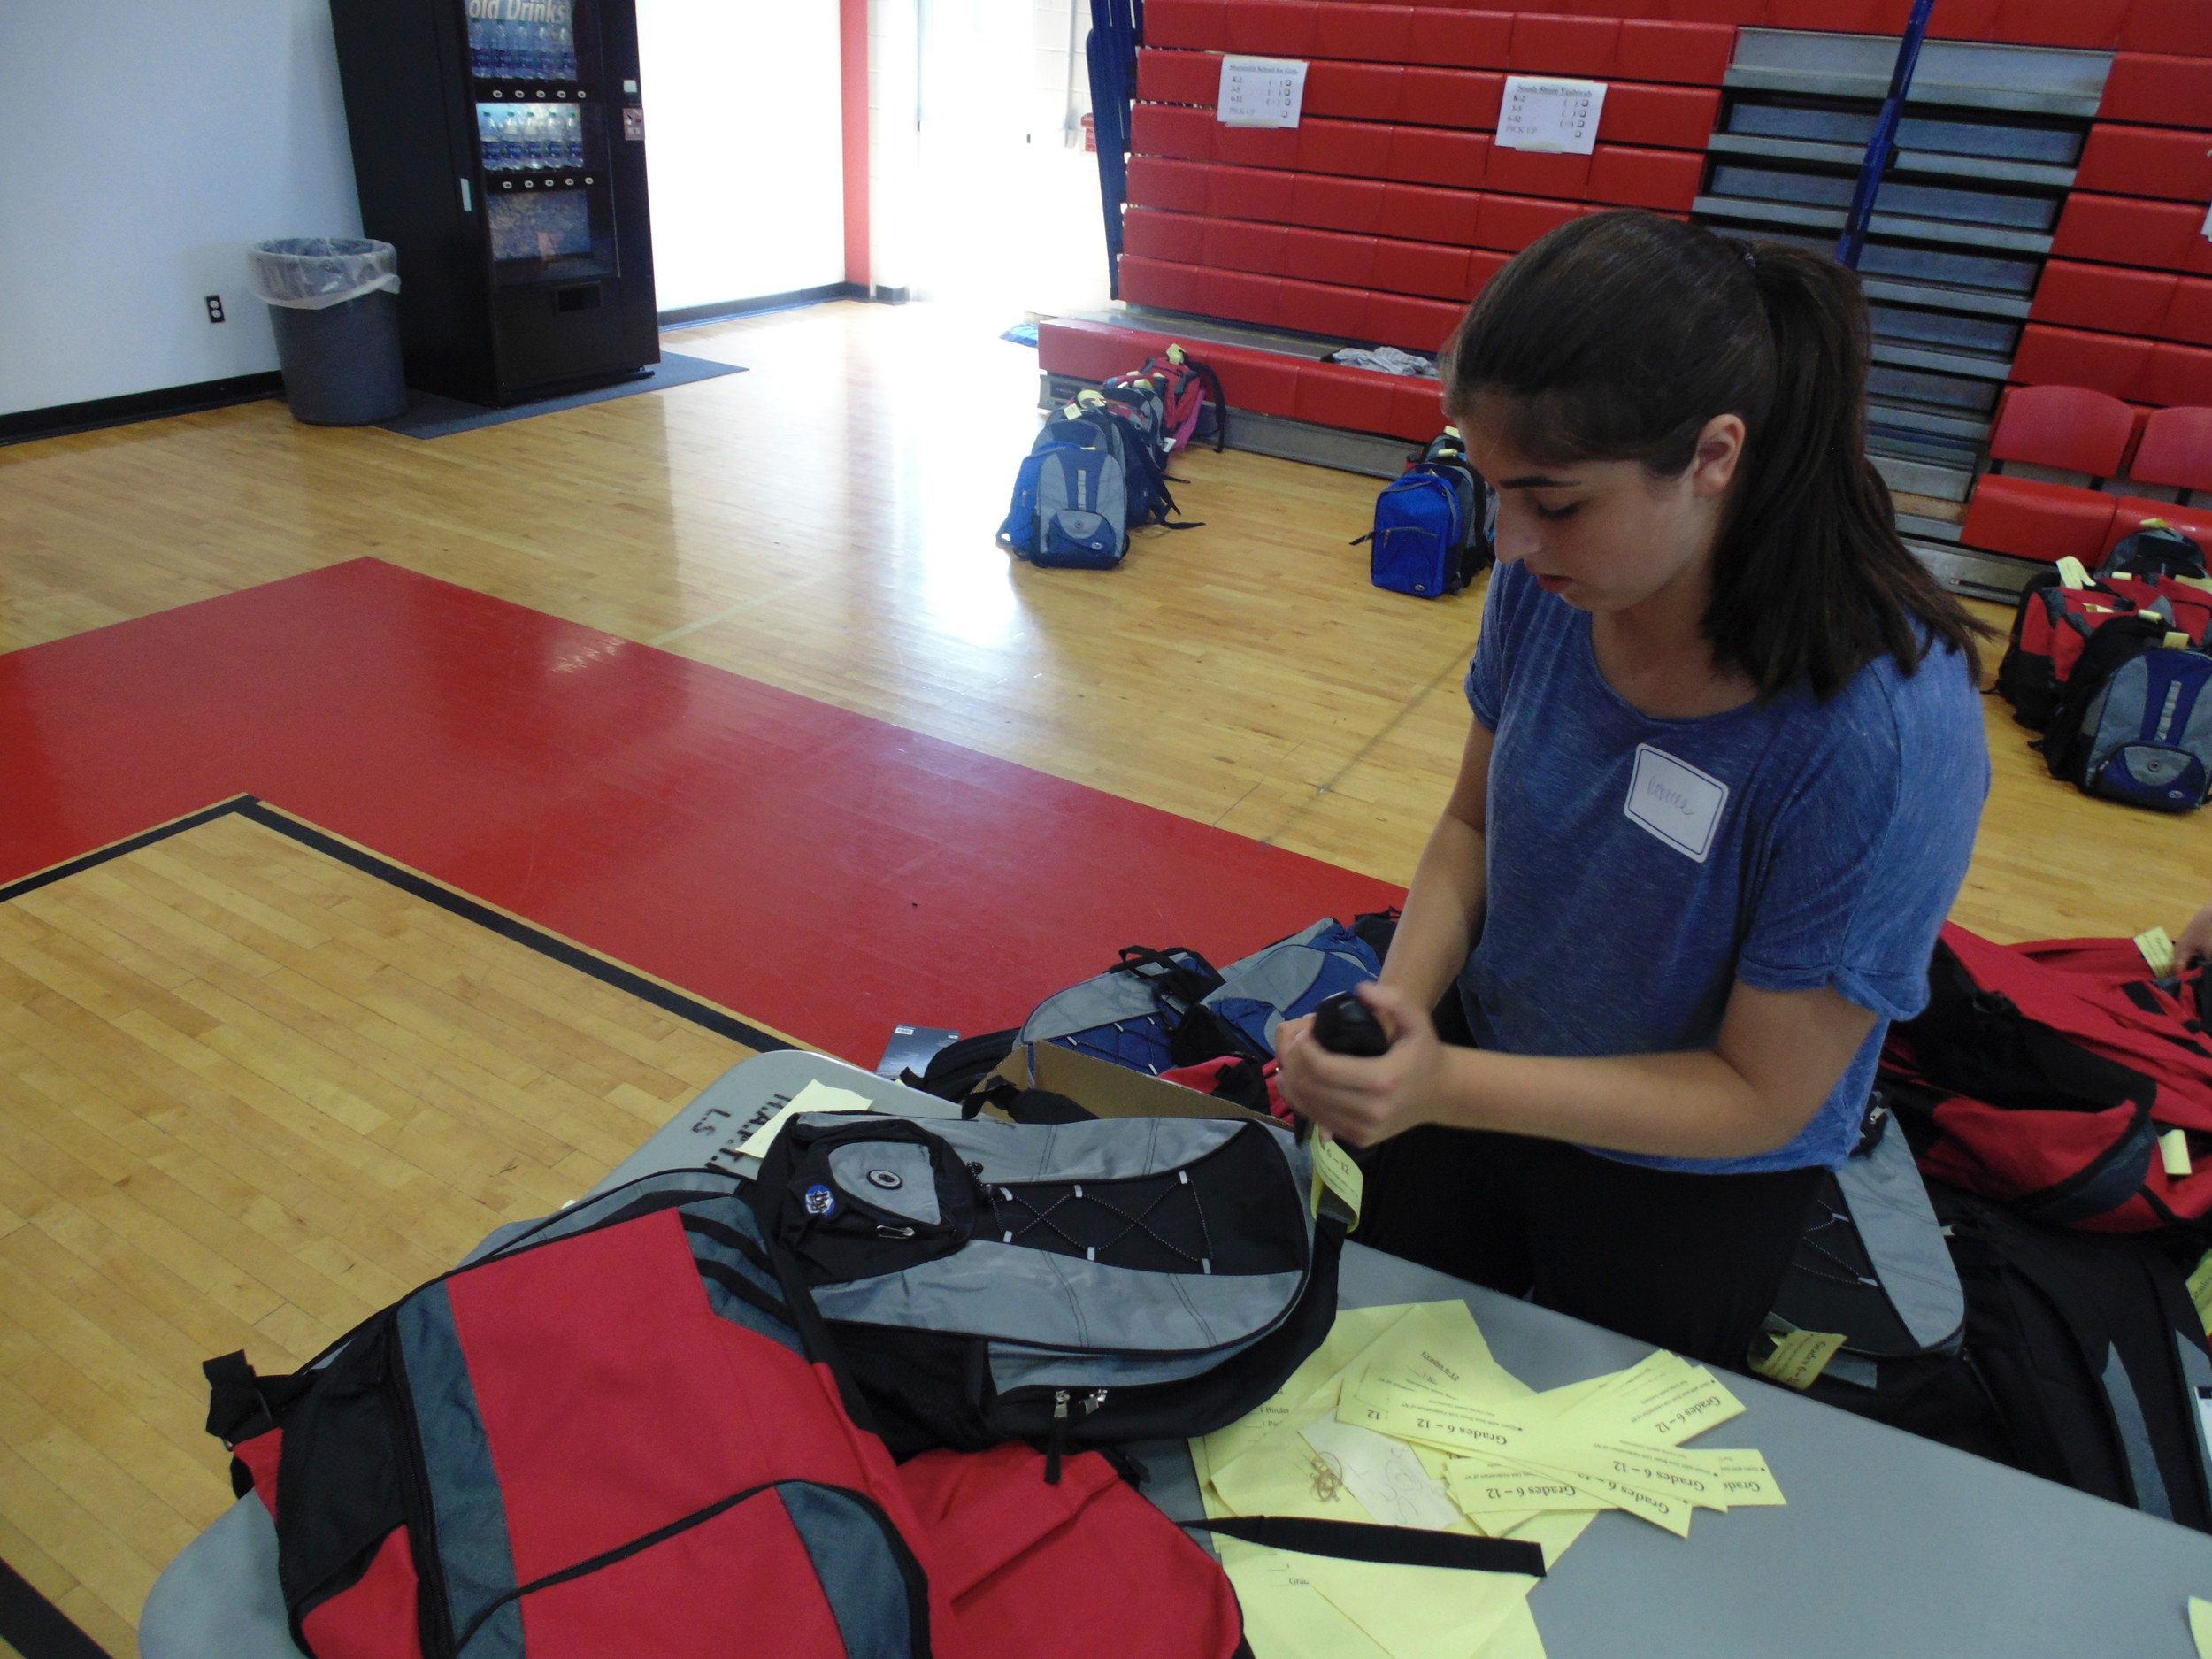 Tagging the finished packed backpacks to be sorted was 13-year-old Rebecca Aaron’s job at Supplies for Success.